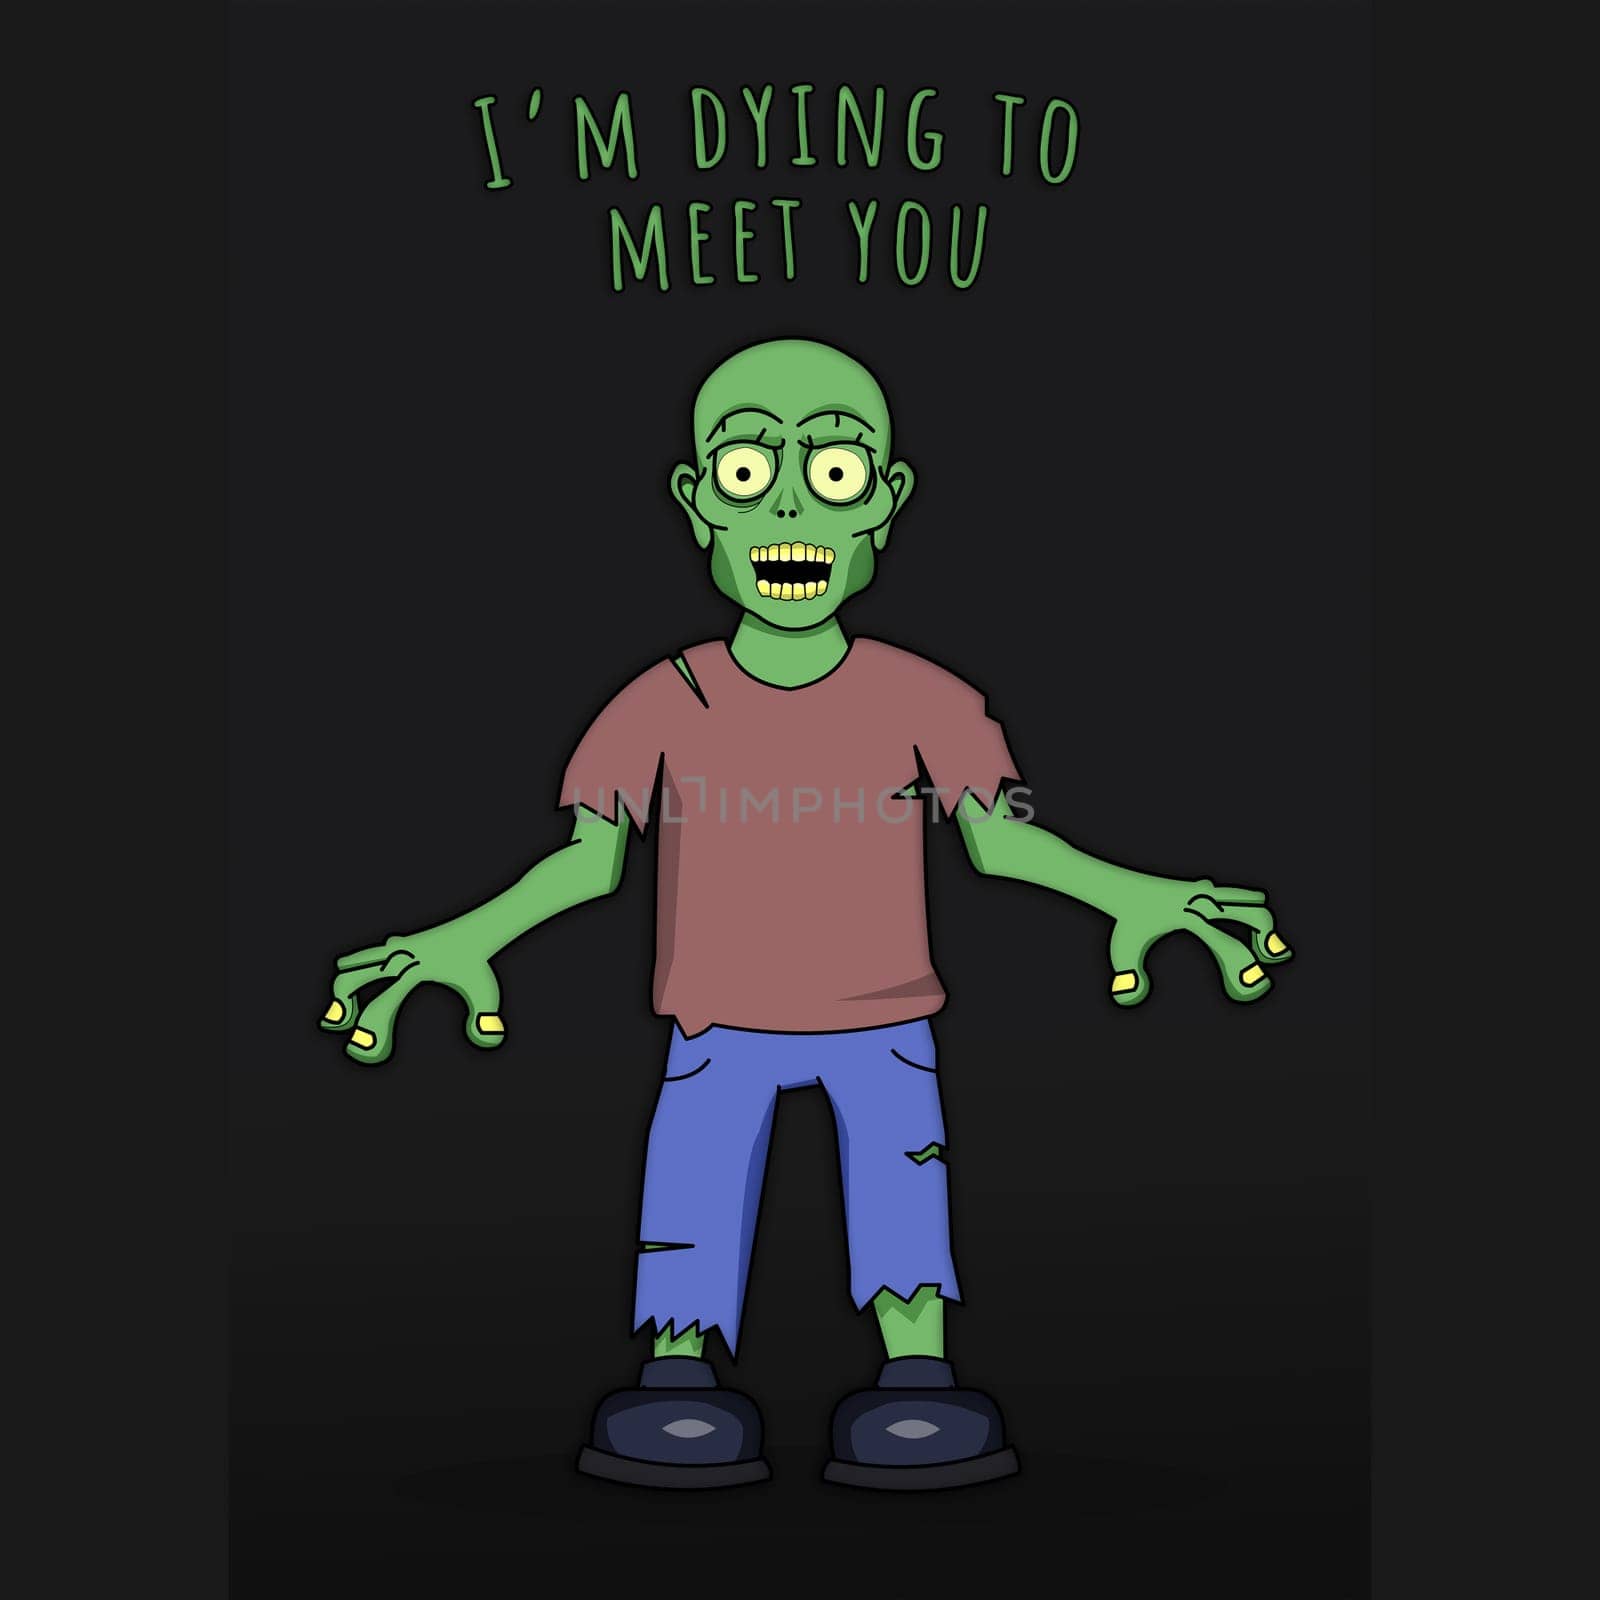 The text "I'm dying to meet you" above a zombie.